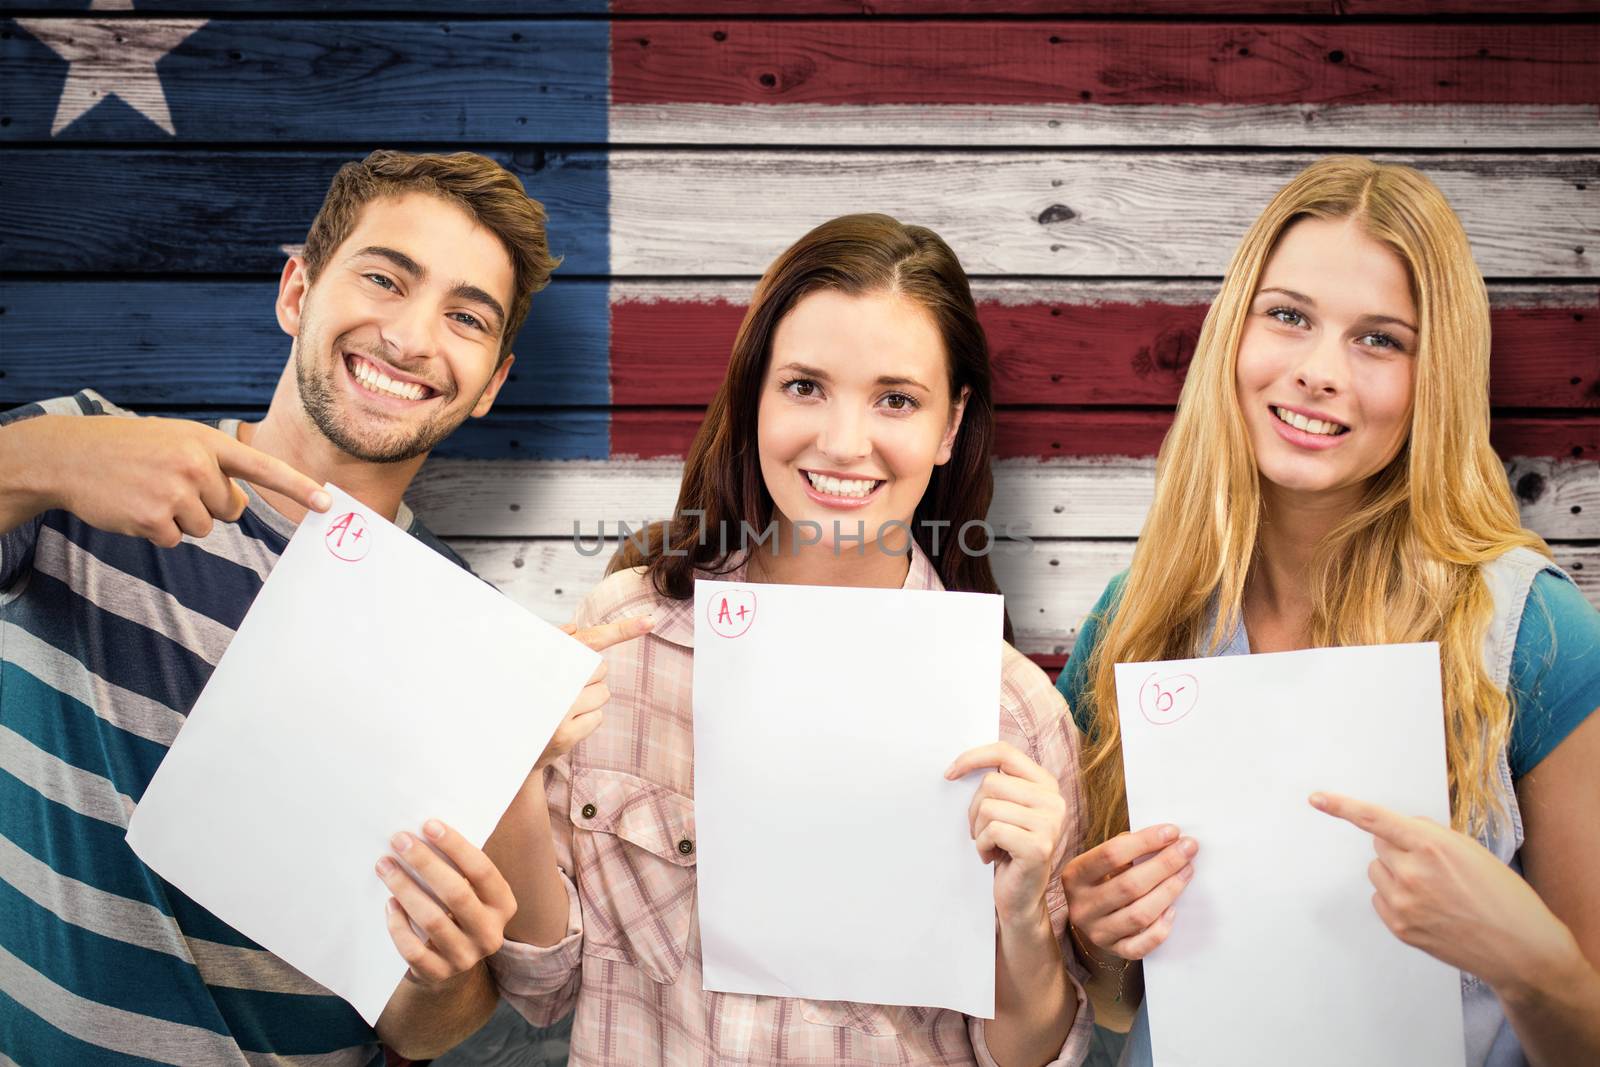 Smiling students showing their exams against composite image of usa national flag